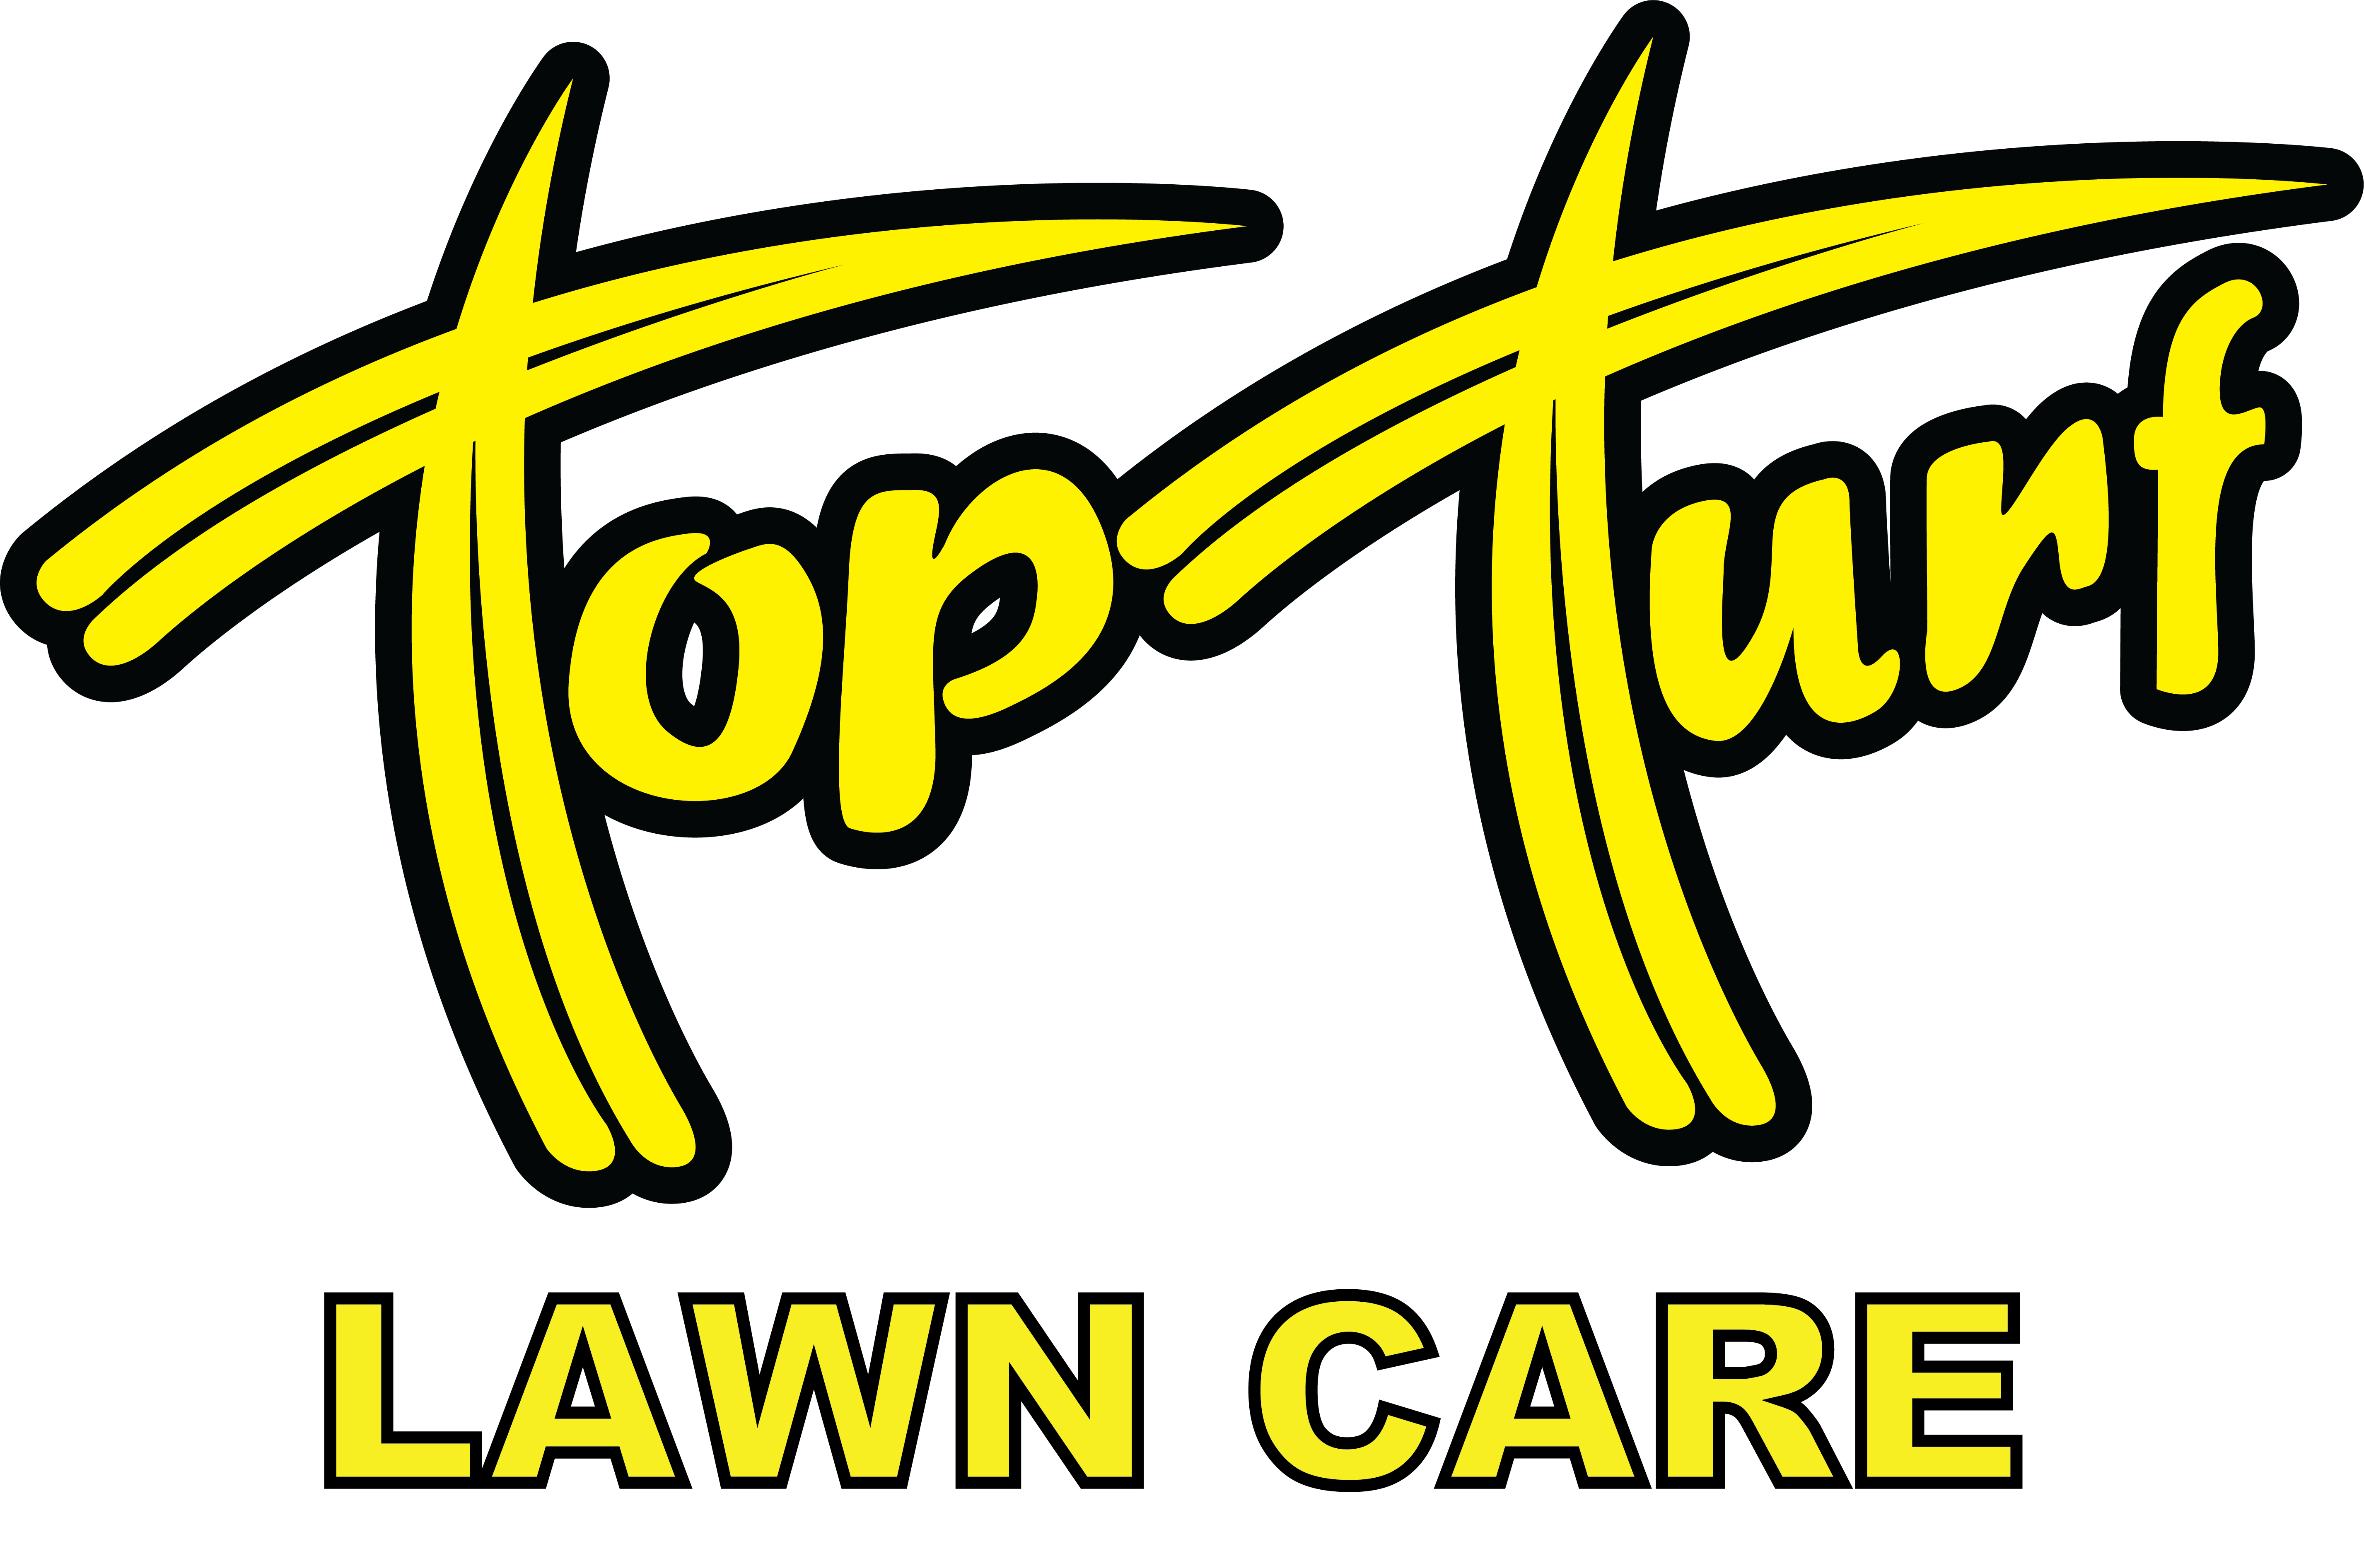 Top Turf logo with lawn care wordmark - white R